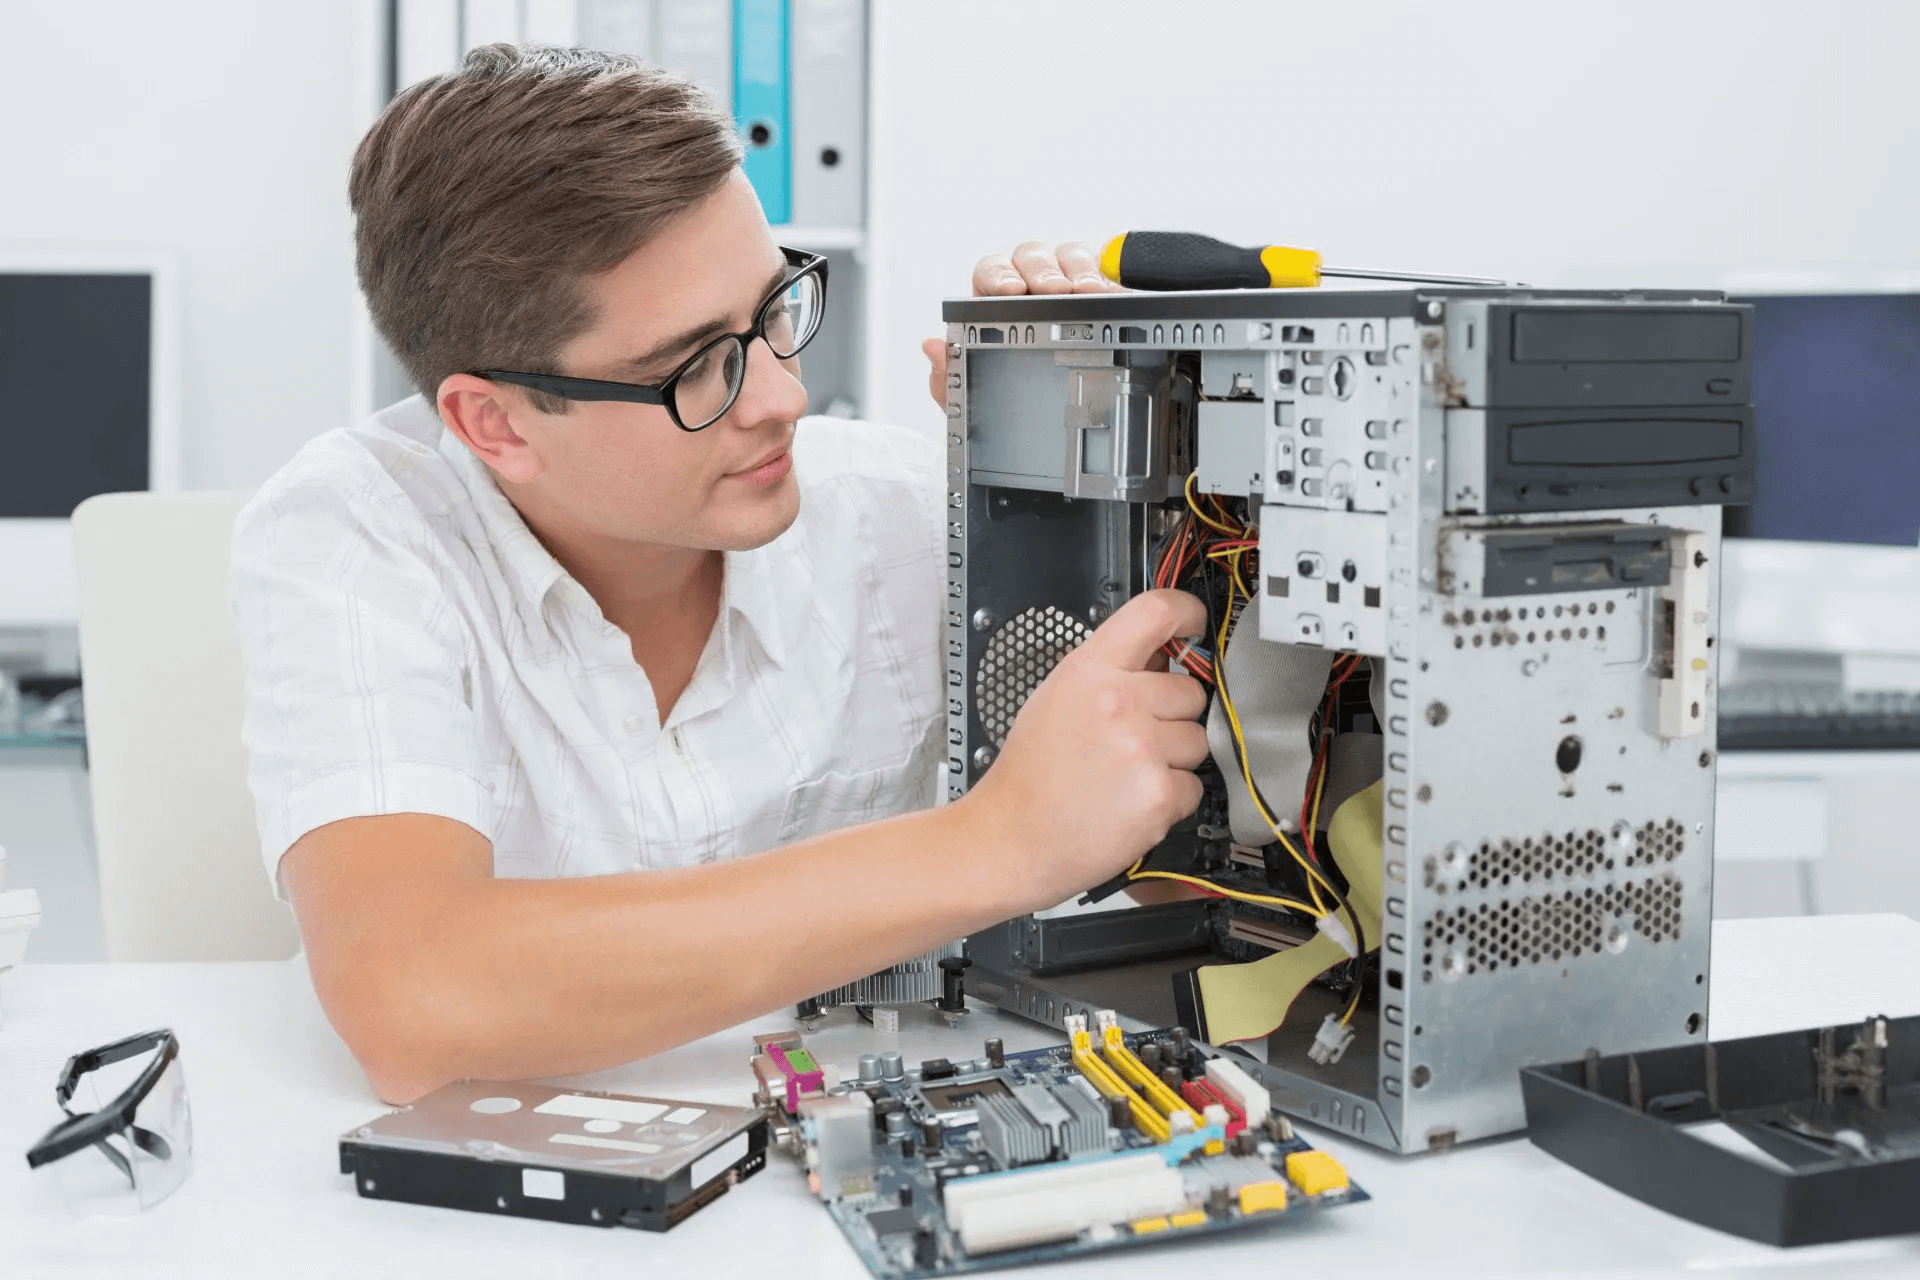 According to Zippia.com, the top 10% of the highest-paid computer repair technicians earn roughly $35,000.